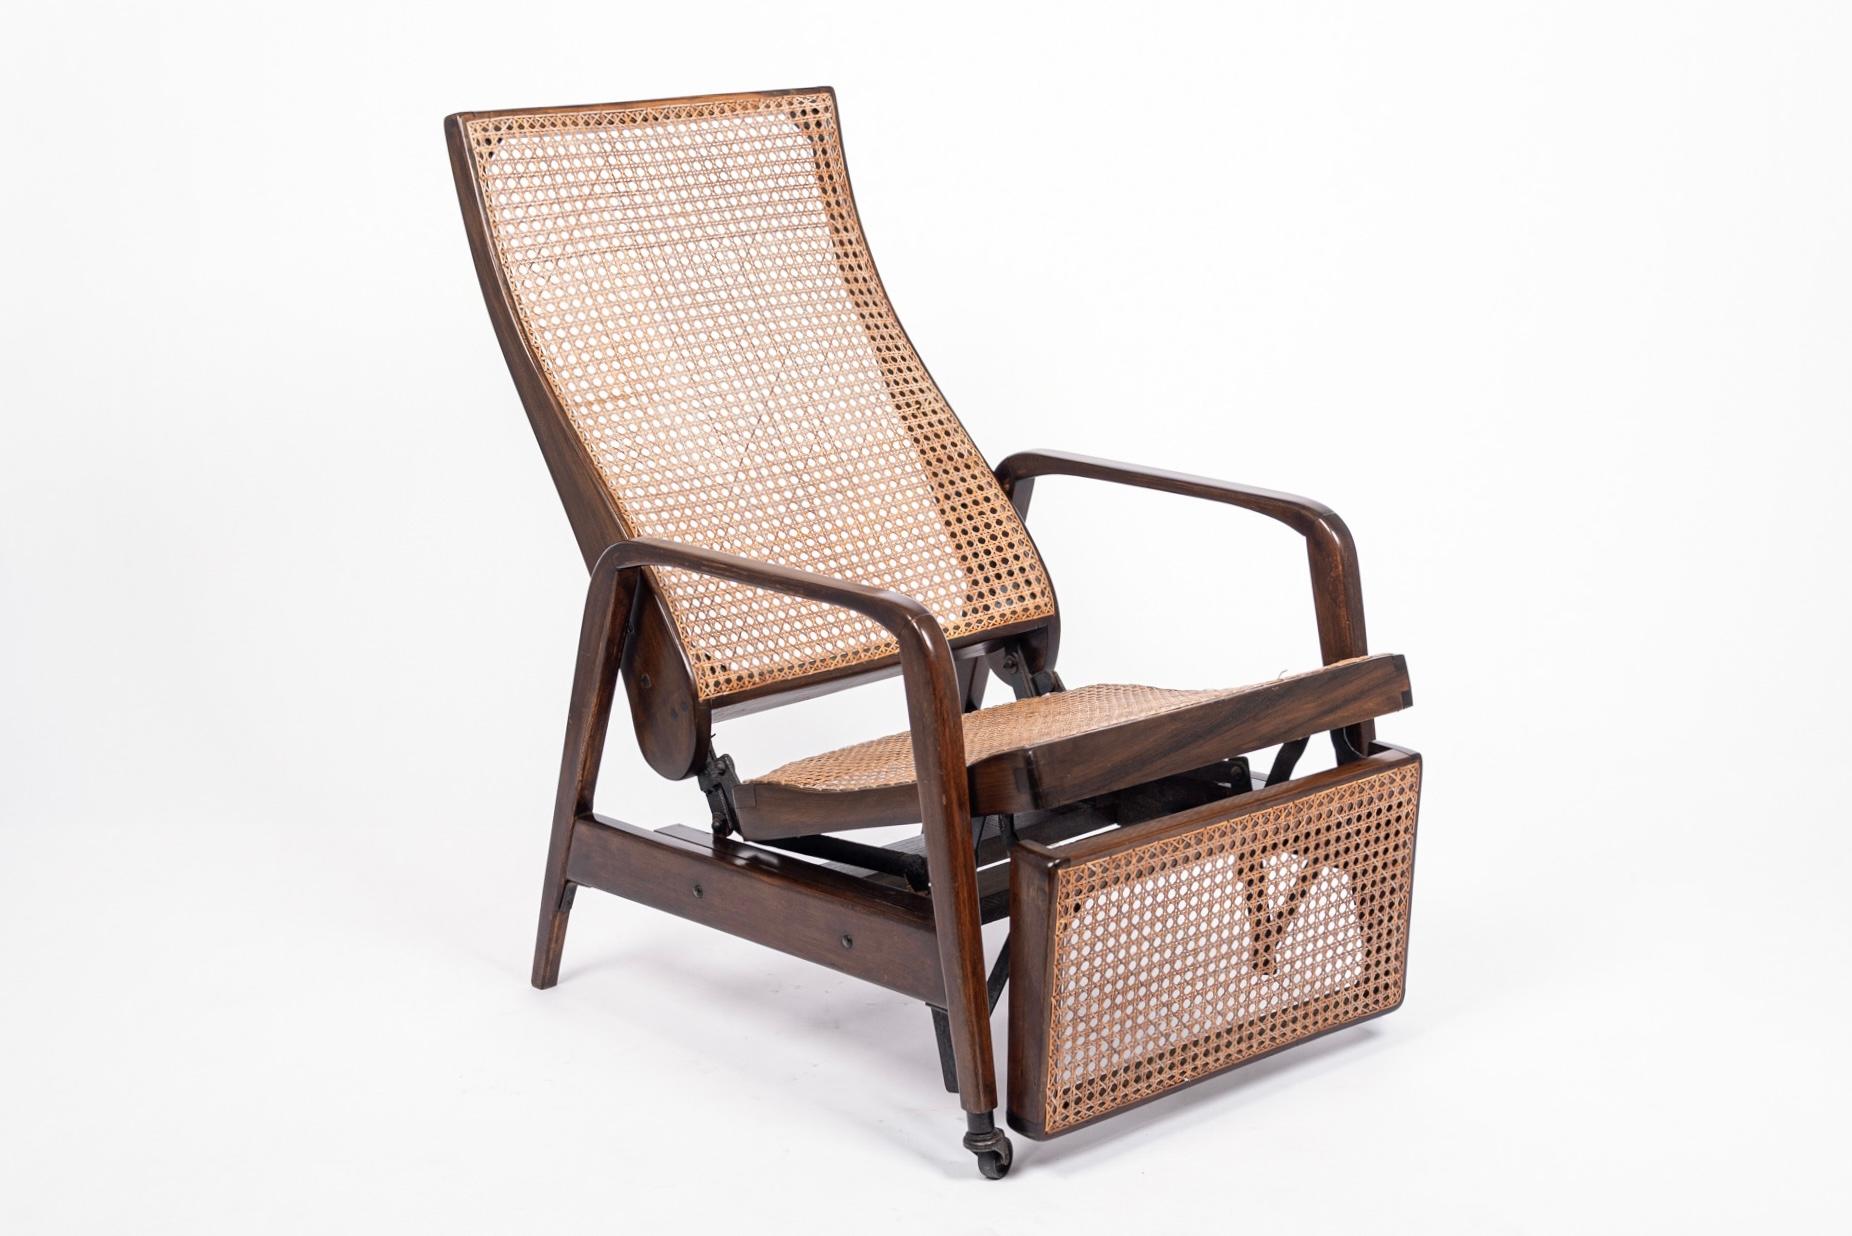 This unique antique Brazilian mechanical recliner lounge chair was made in the early 20th century. This exceptional chair is expertly handcrafted from solid walnut wood and features hand caned seat, backrest and footrest with metal caster wheels on